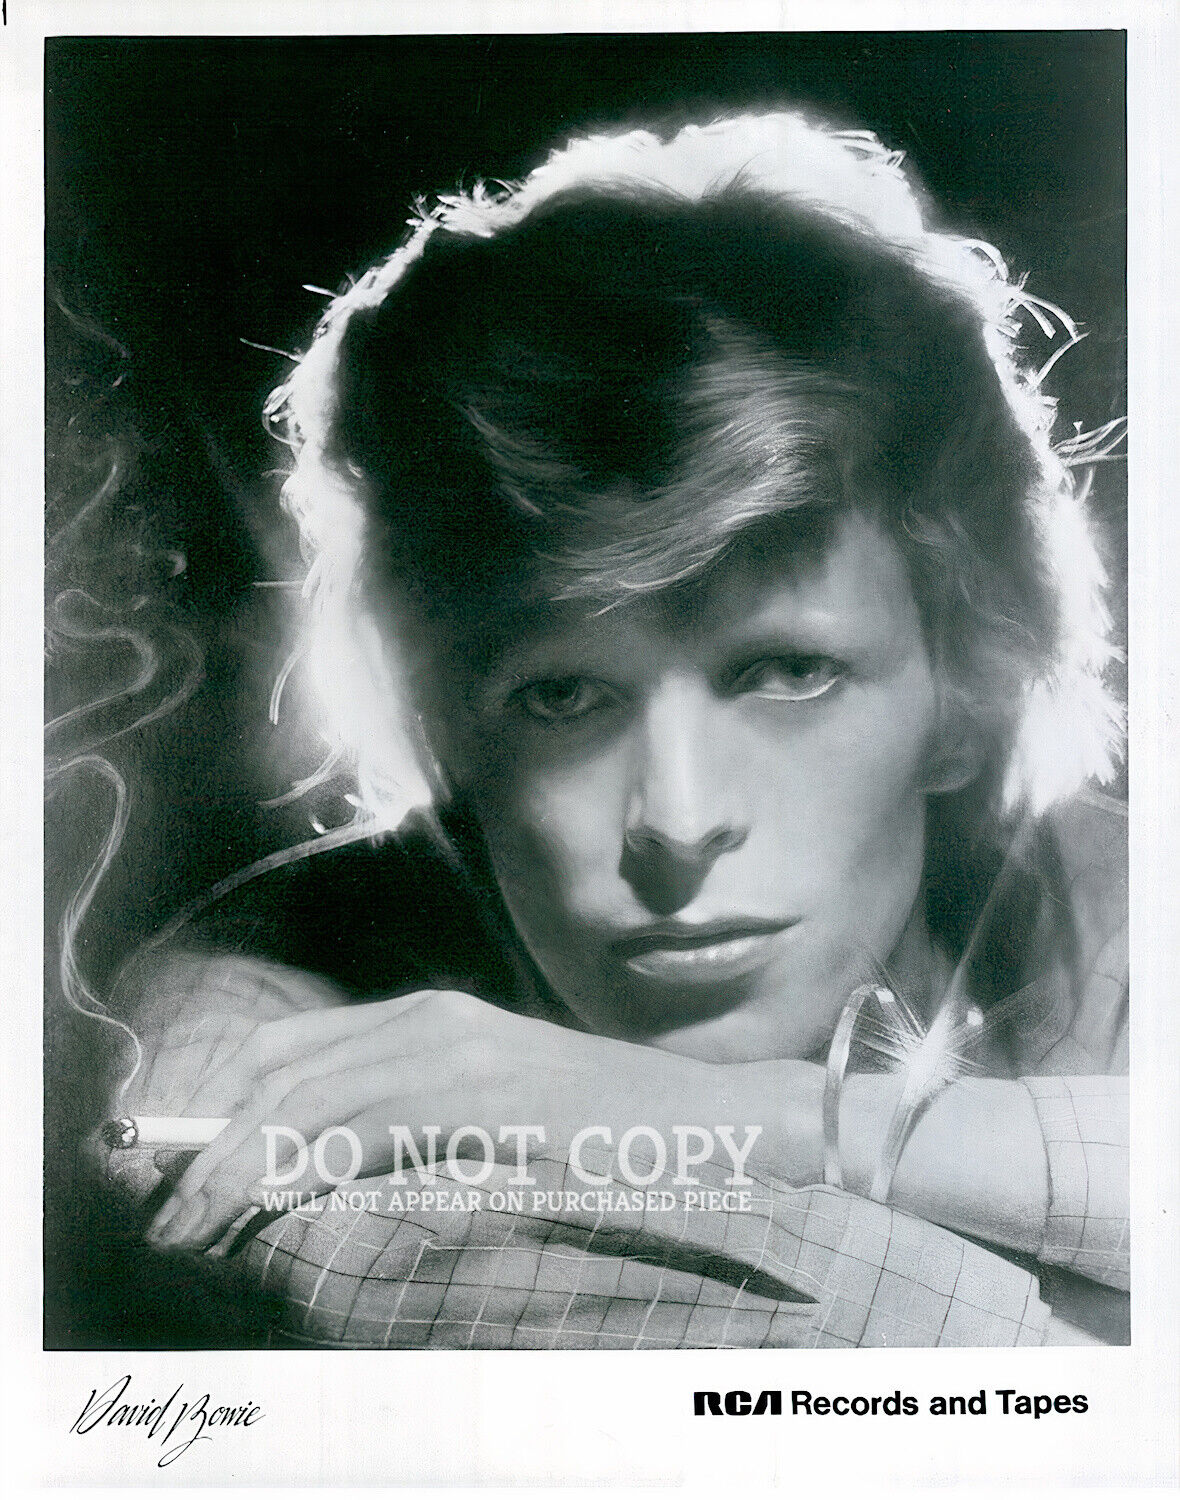 David Bowie Photograph 8 X 10 - Stunning 1975 Rca Records Photo - Rare Poster